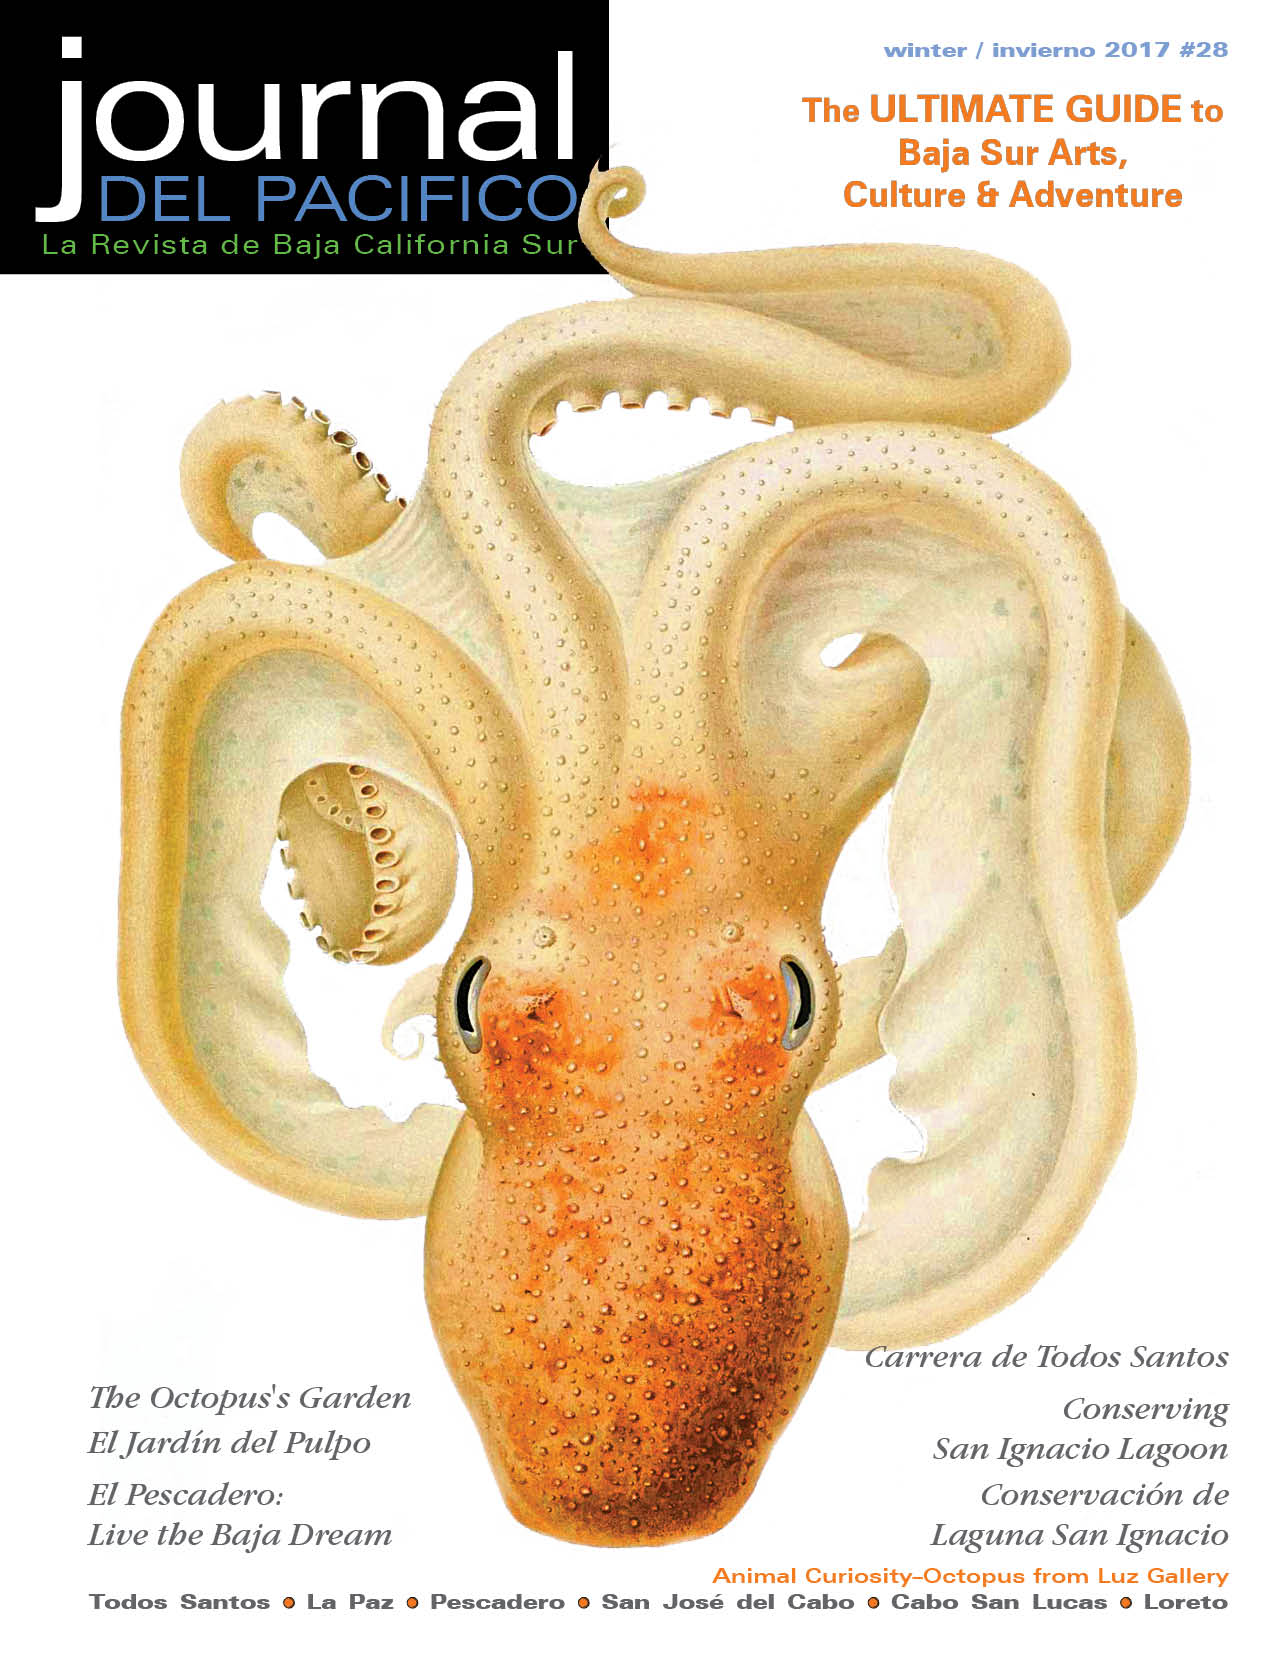 Winter 2017 Issue of Journal del Pacifico